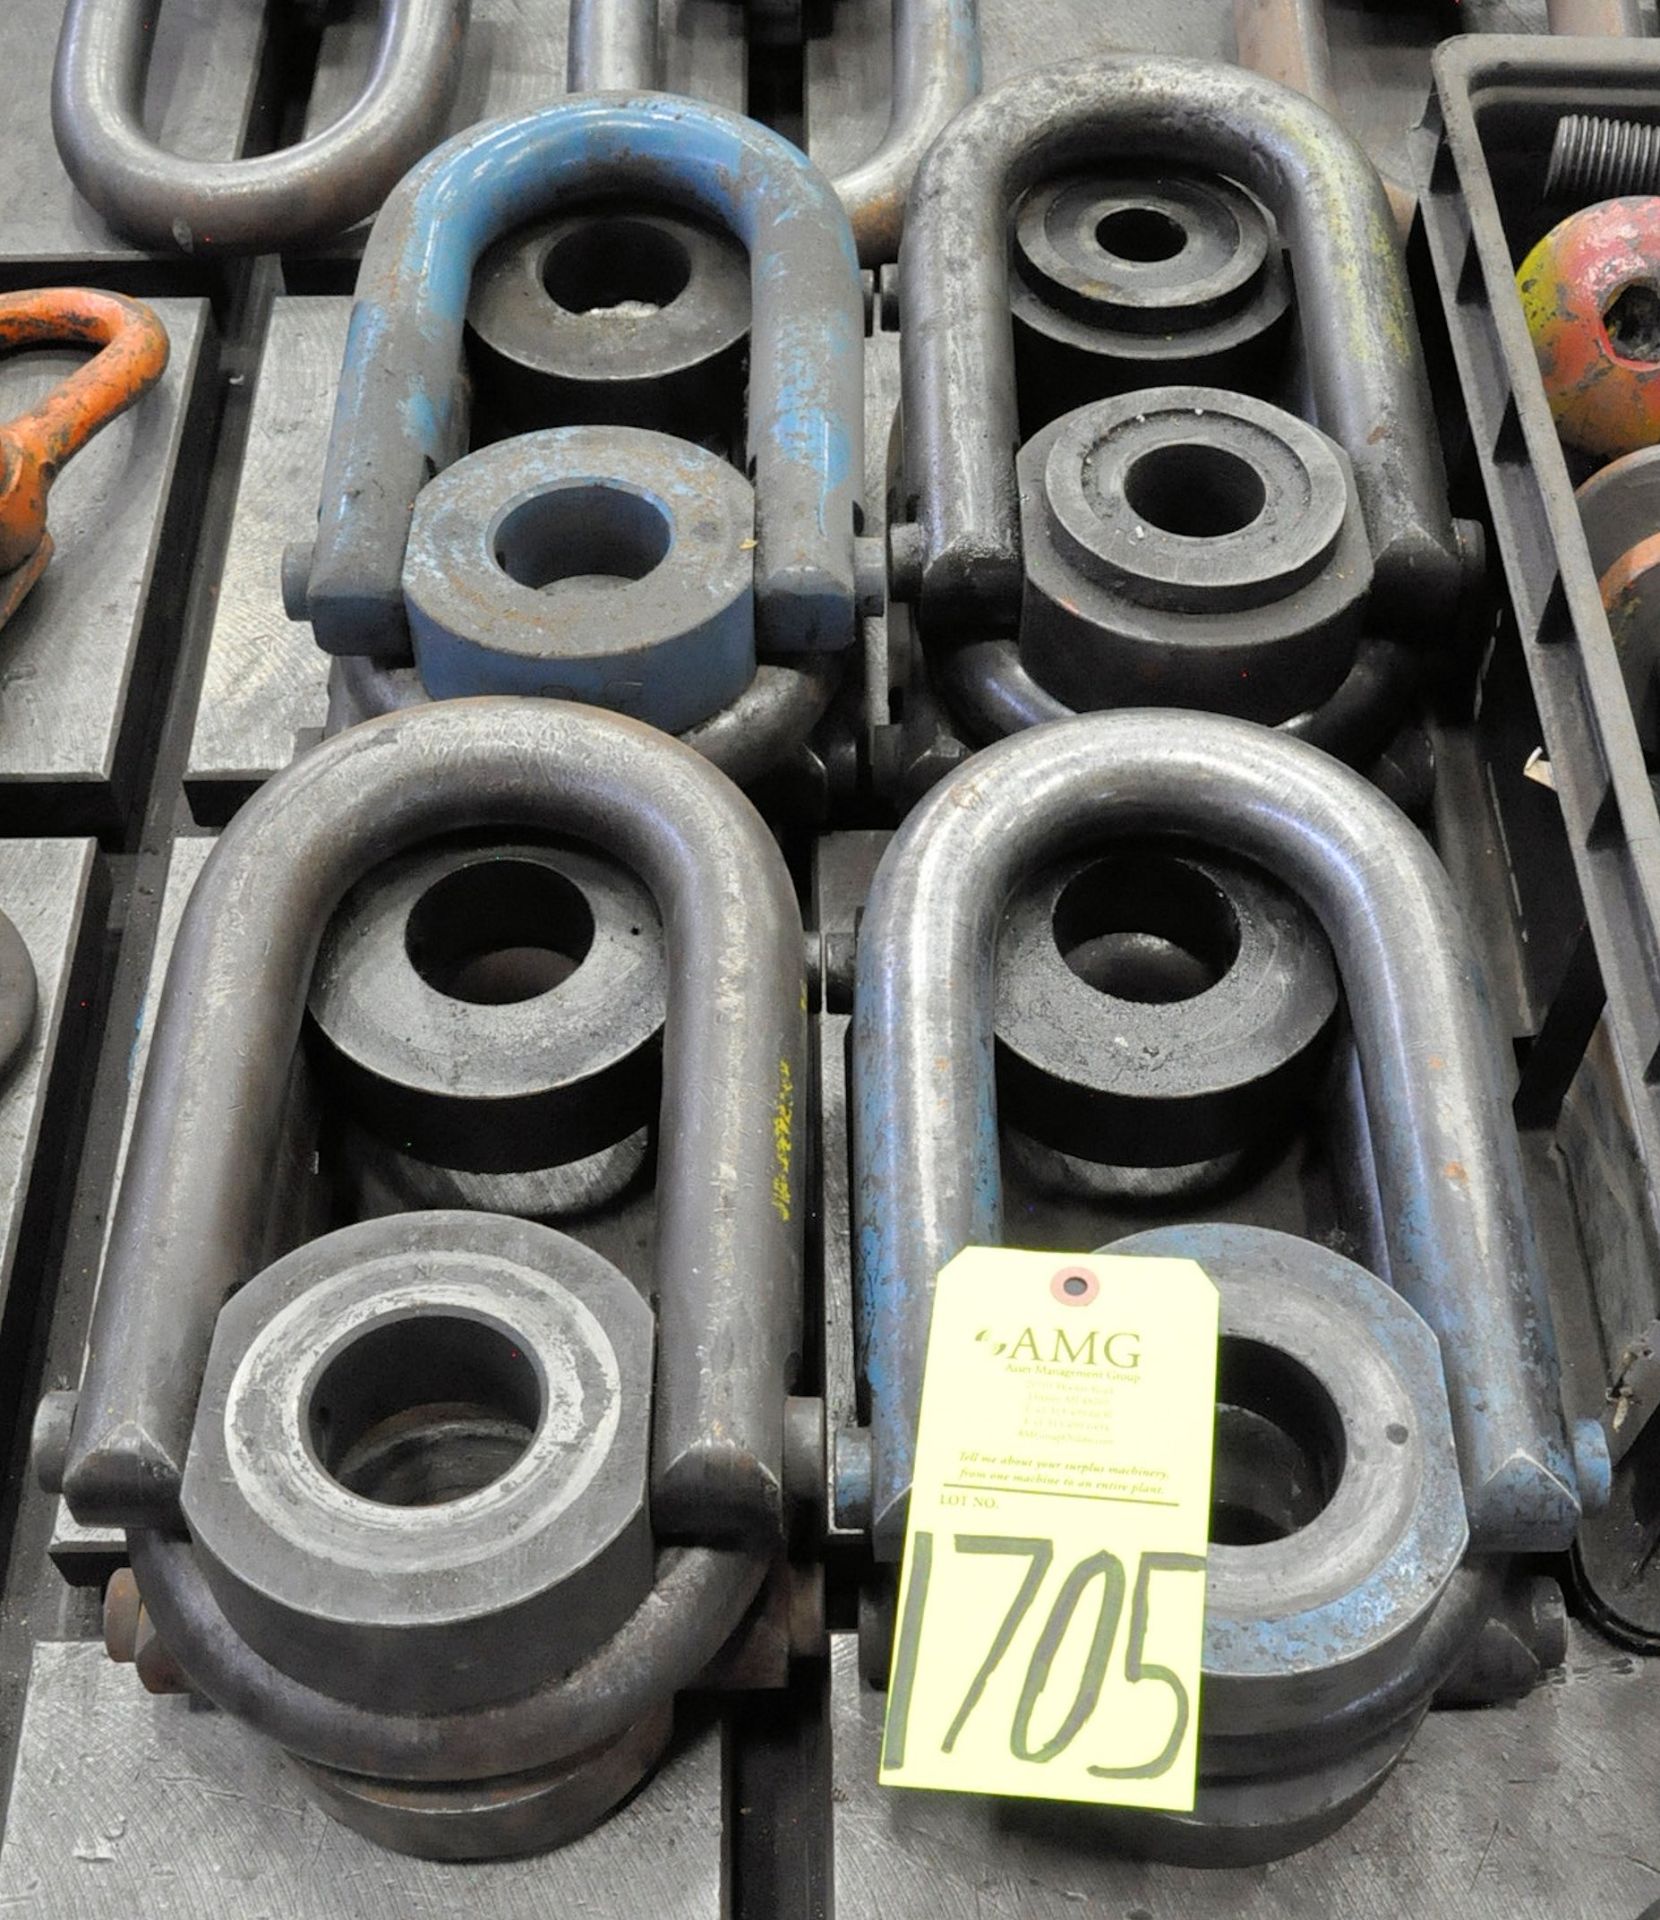 Lot-(8) Die Lifting Rings, (Missing Bolts), (G-25), (Yellow Tag)